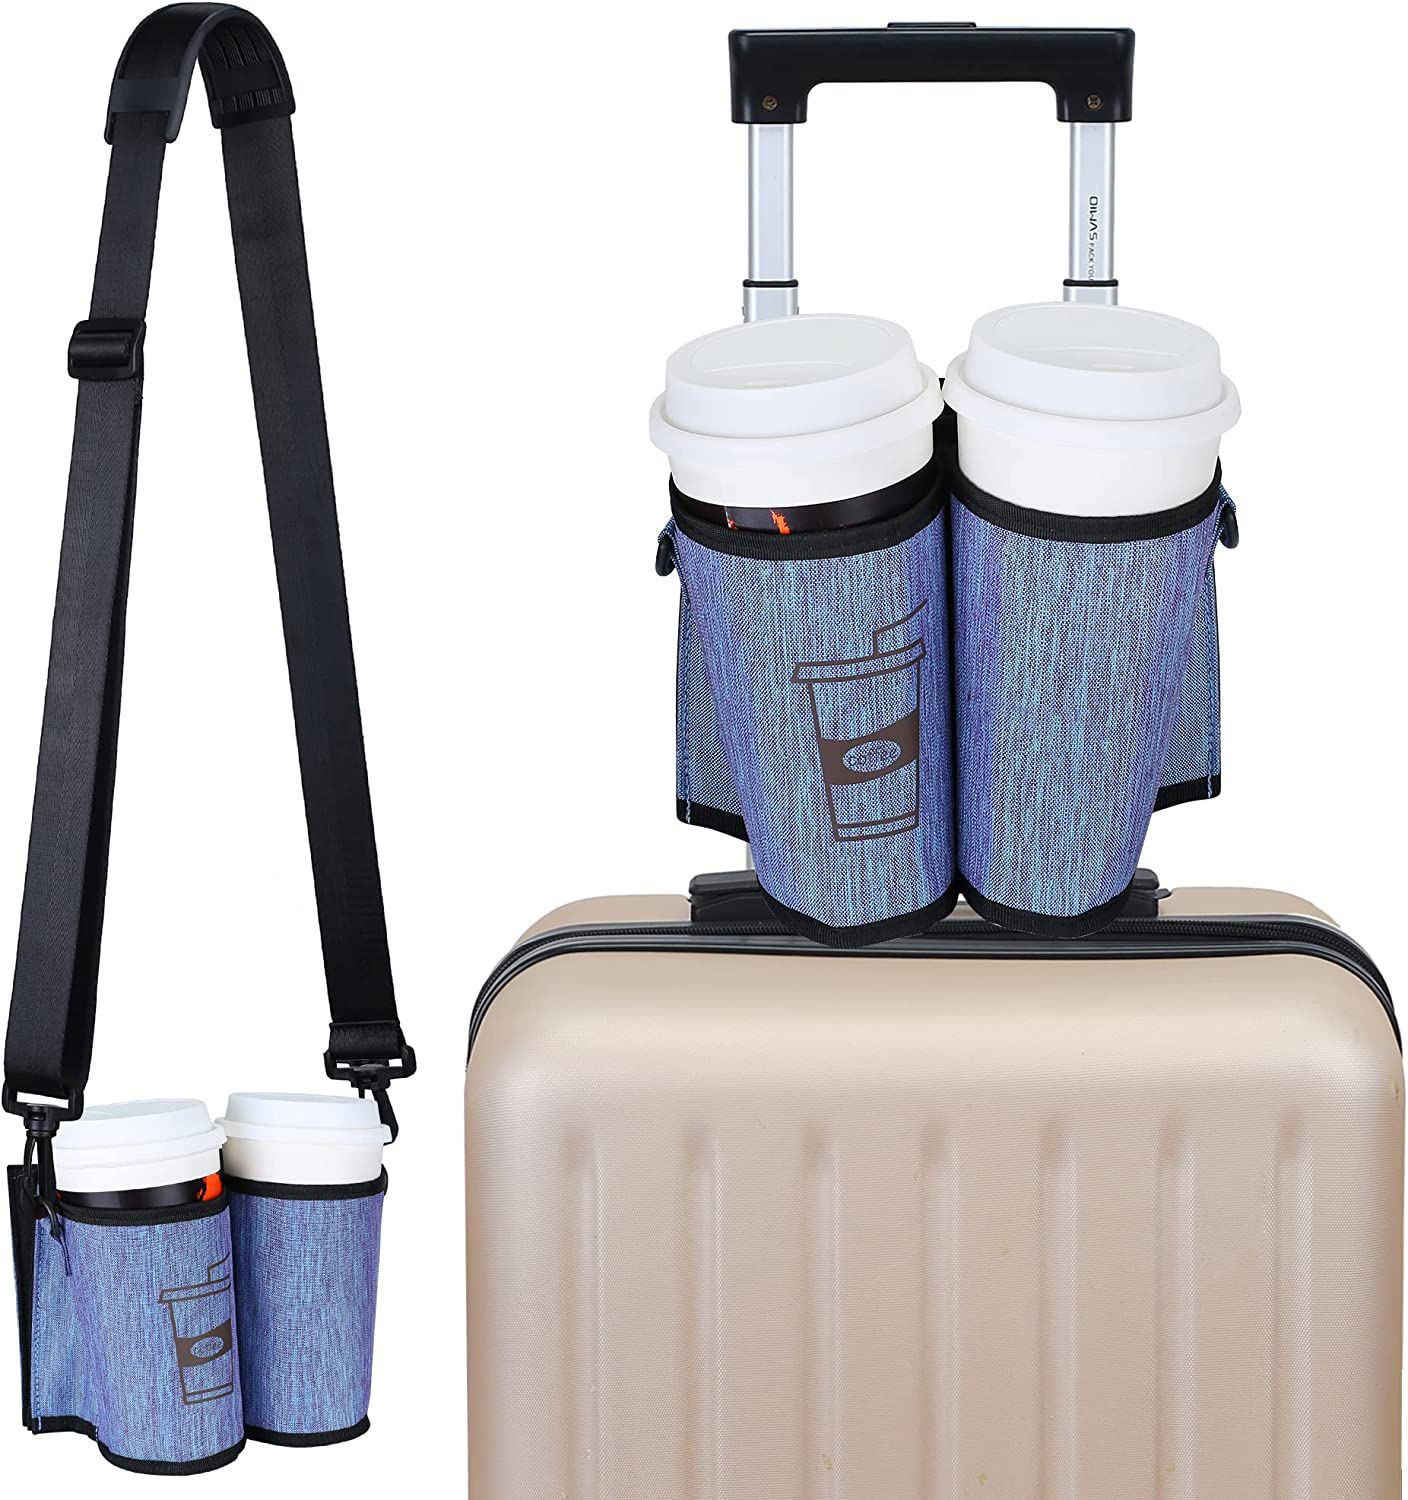 Thermal Luggage Travel Cup Holder Bag With Shoulder Strap Insulated Travel Drink Caddy Free Your Hand Oem Acceptable Factory